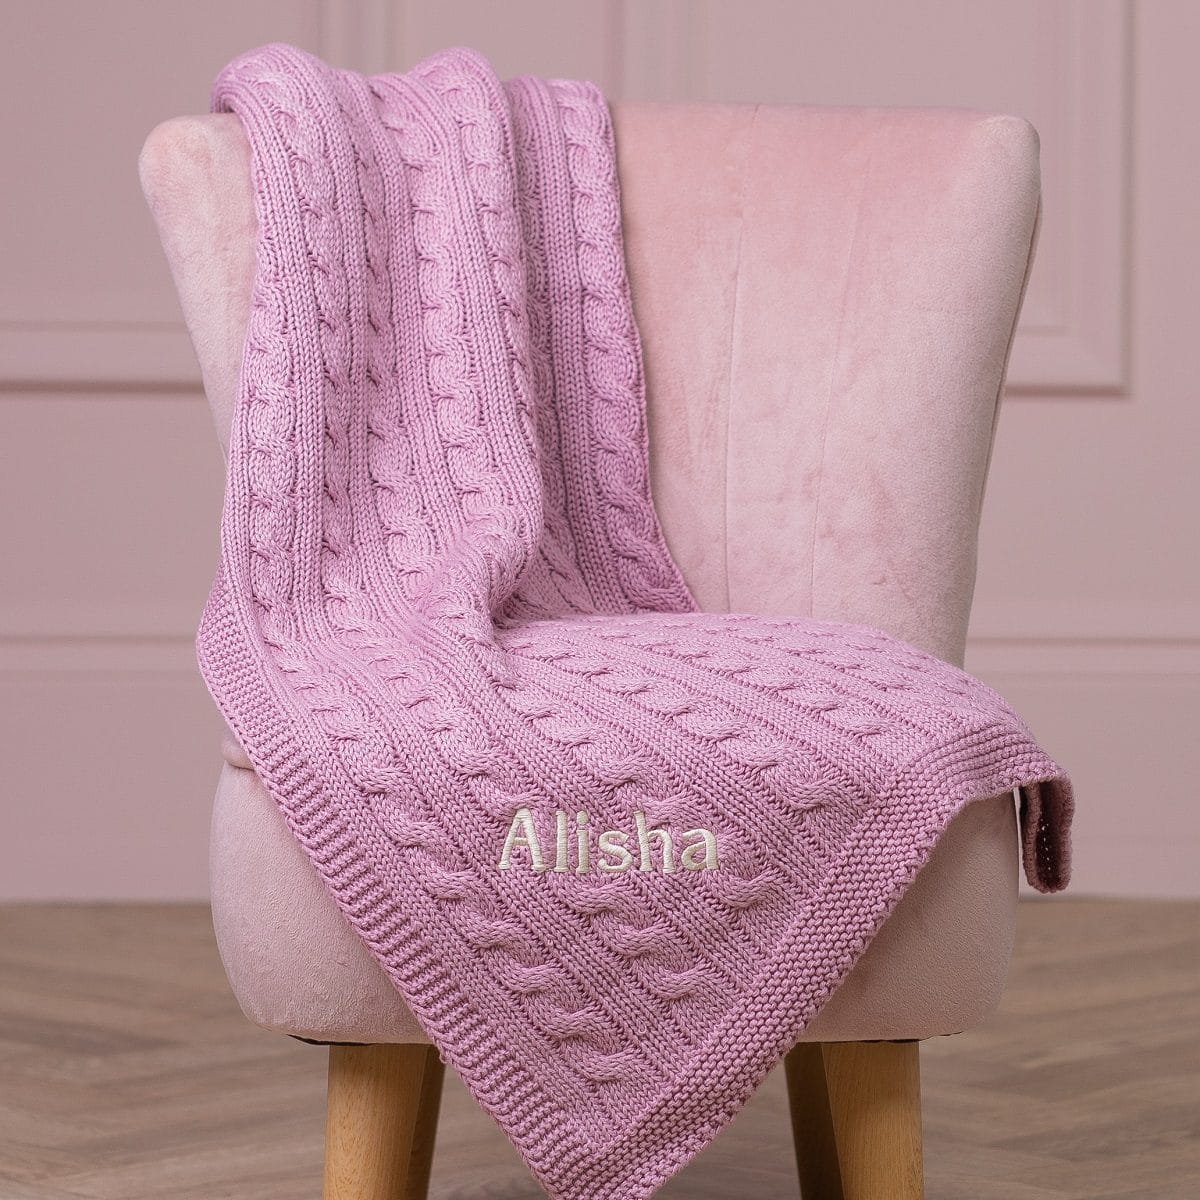 Toffee Moon personalised dawn pink luxury cable baby blanket Birthday Gifts 2